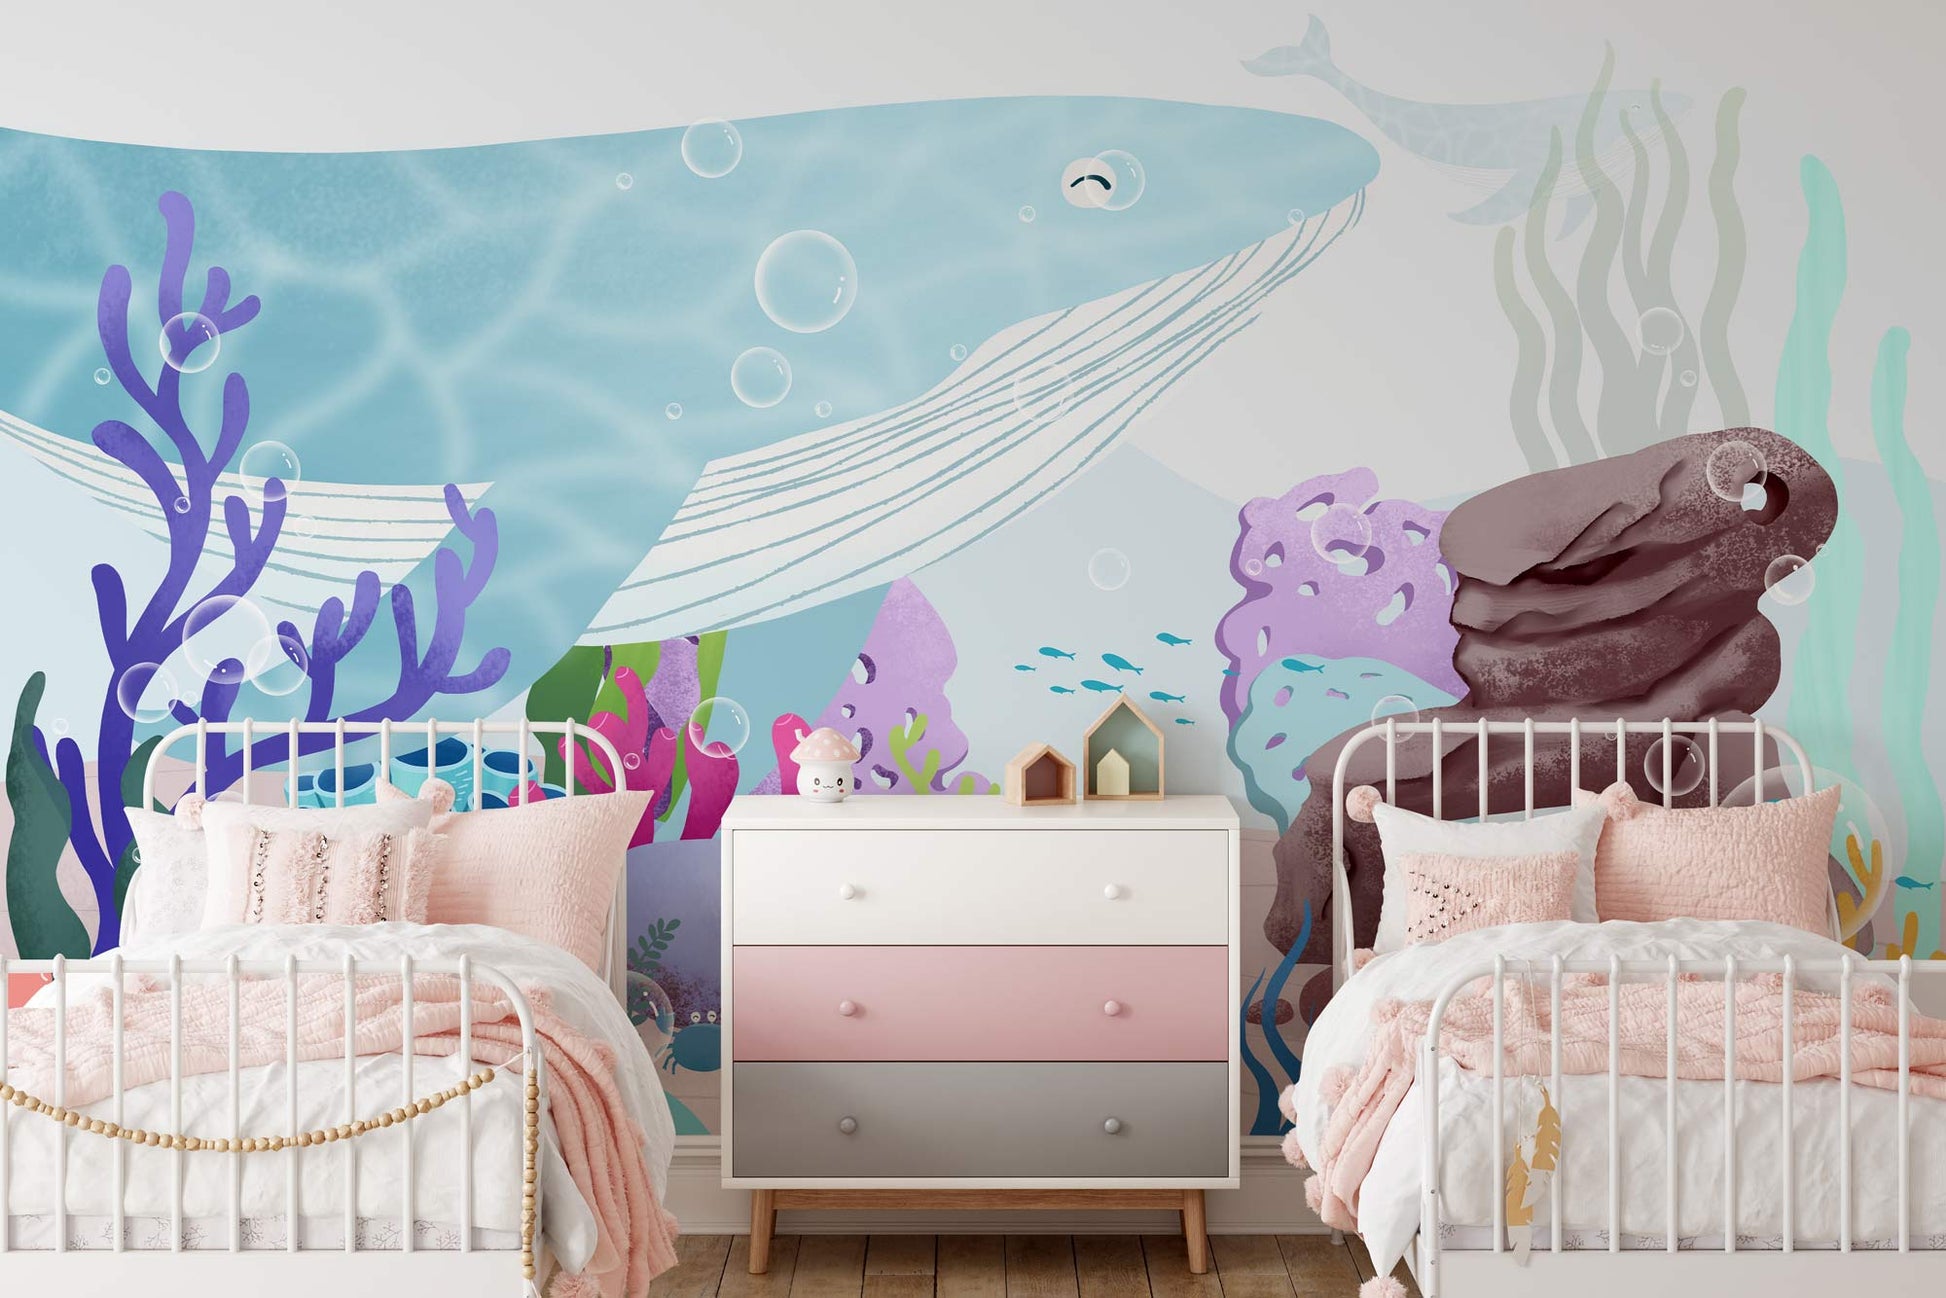 Wallpaper mural featuring seabed animals for use in decorating a nursery